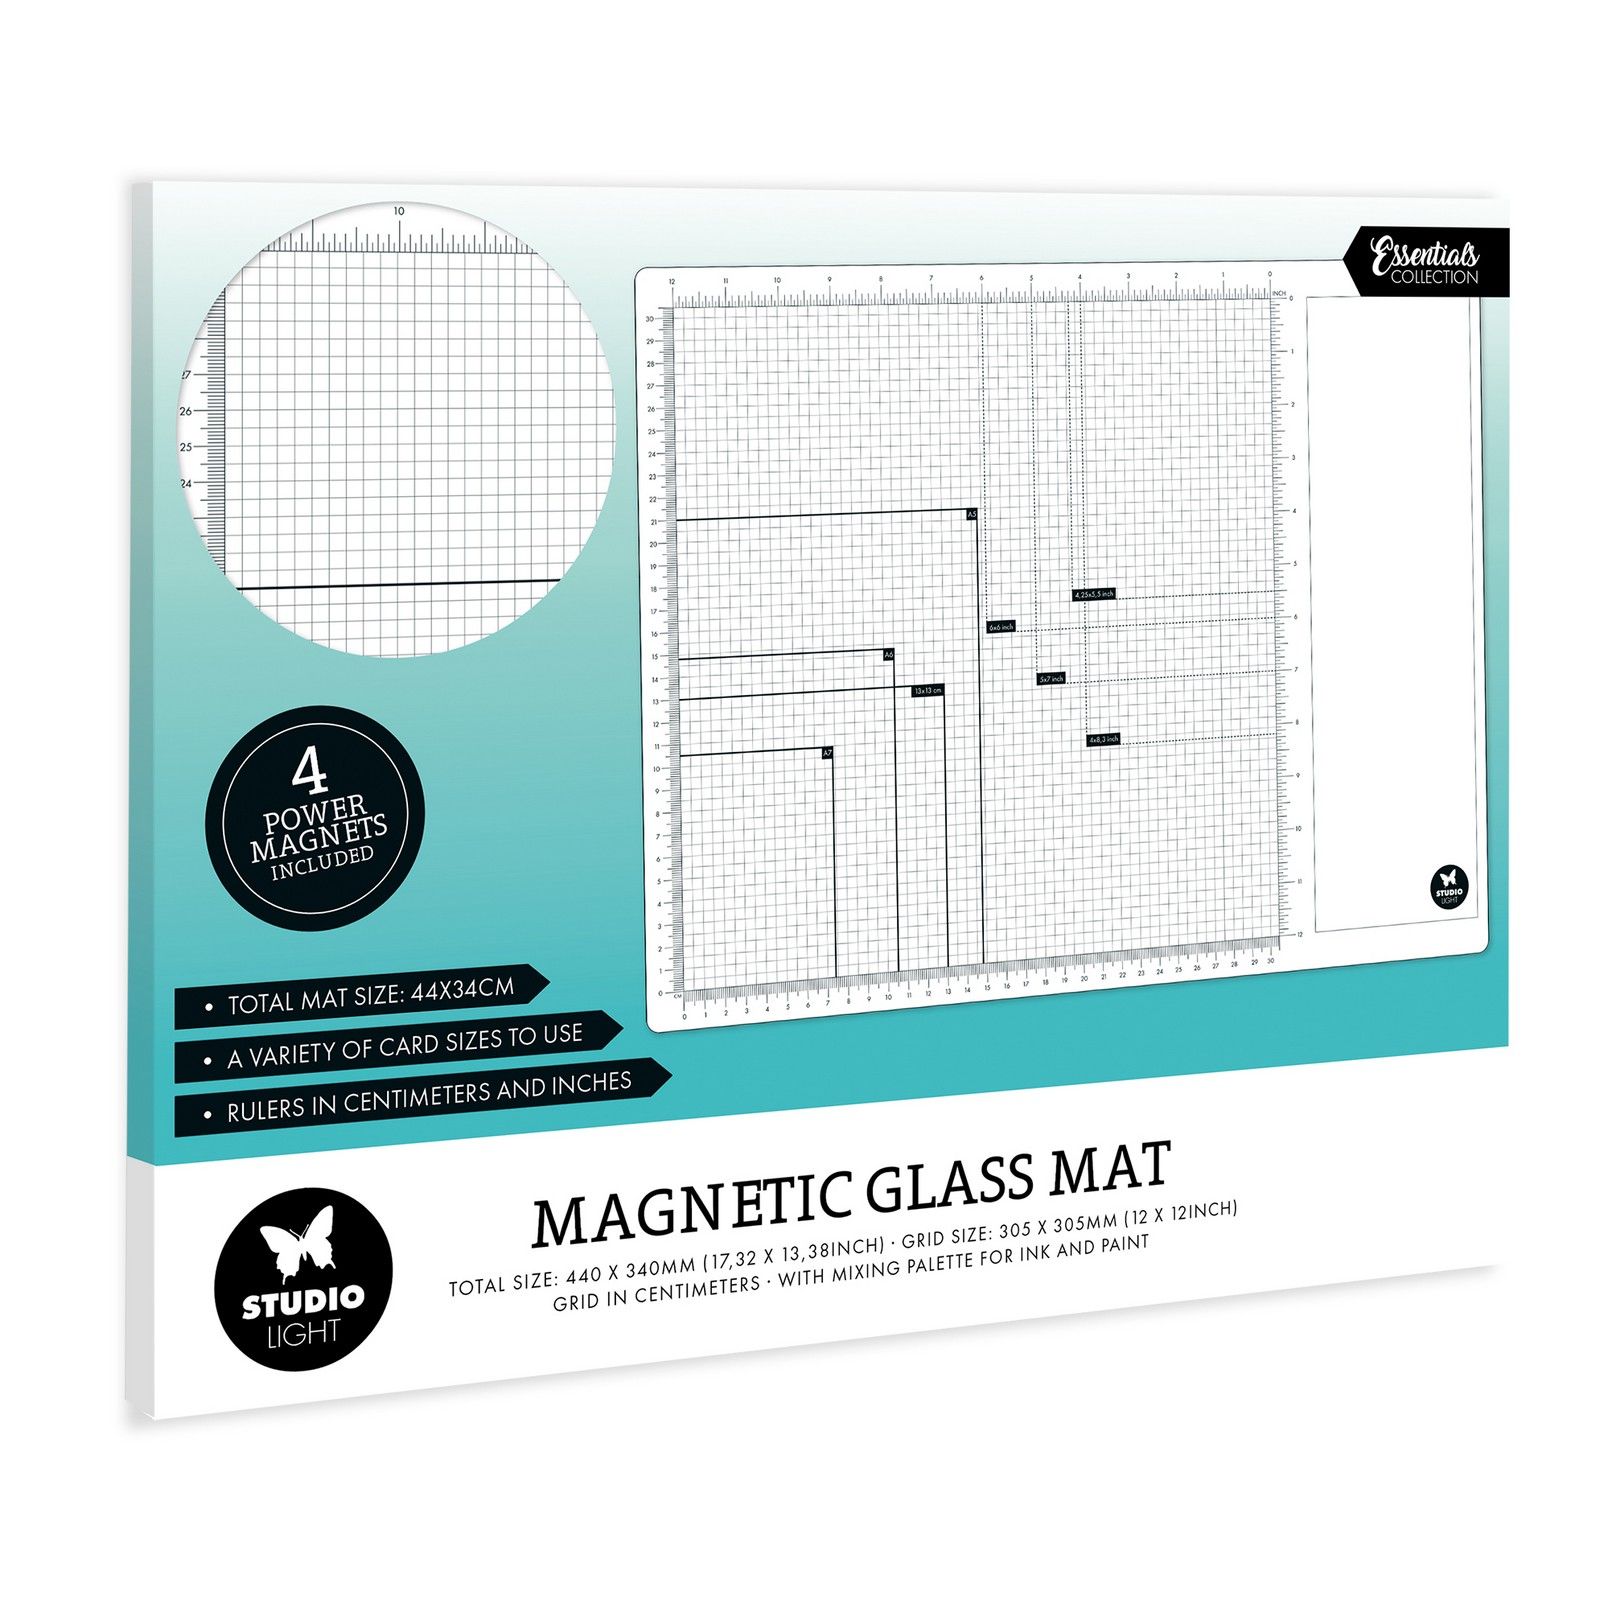 Studio Light • Essentials Magnetic Glass Mat 4 Magnets Included